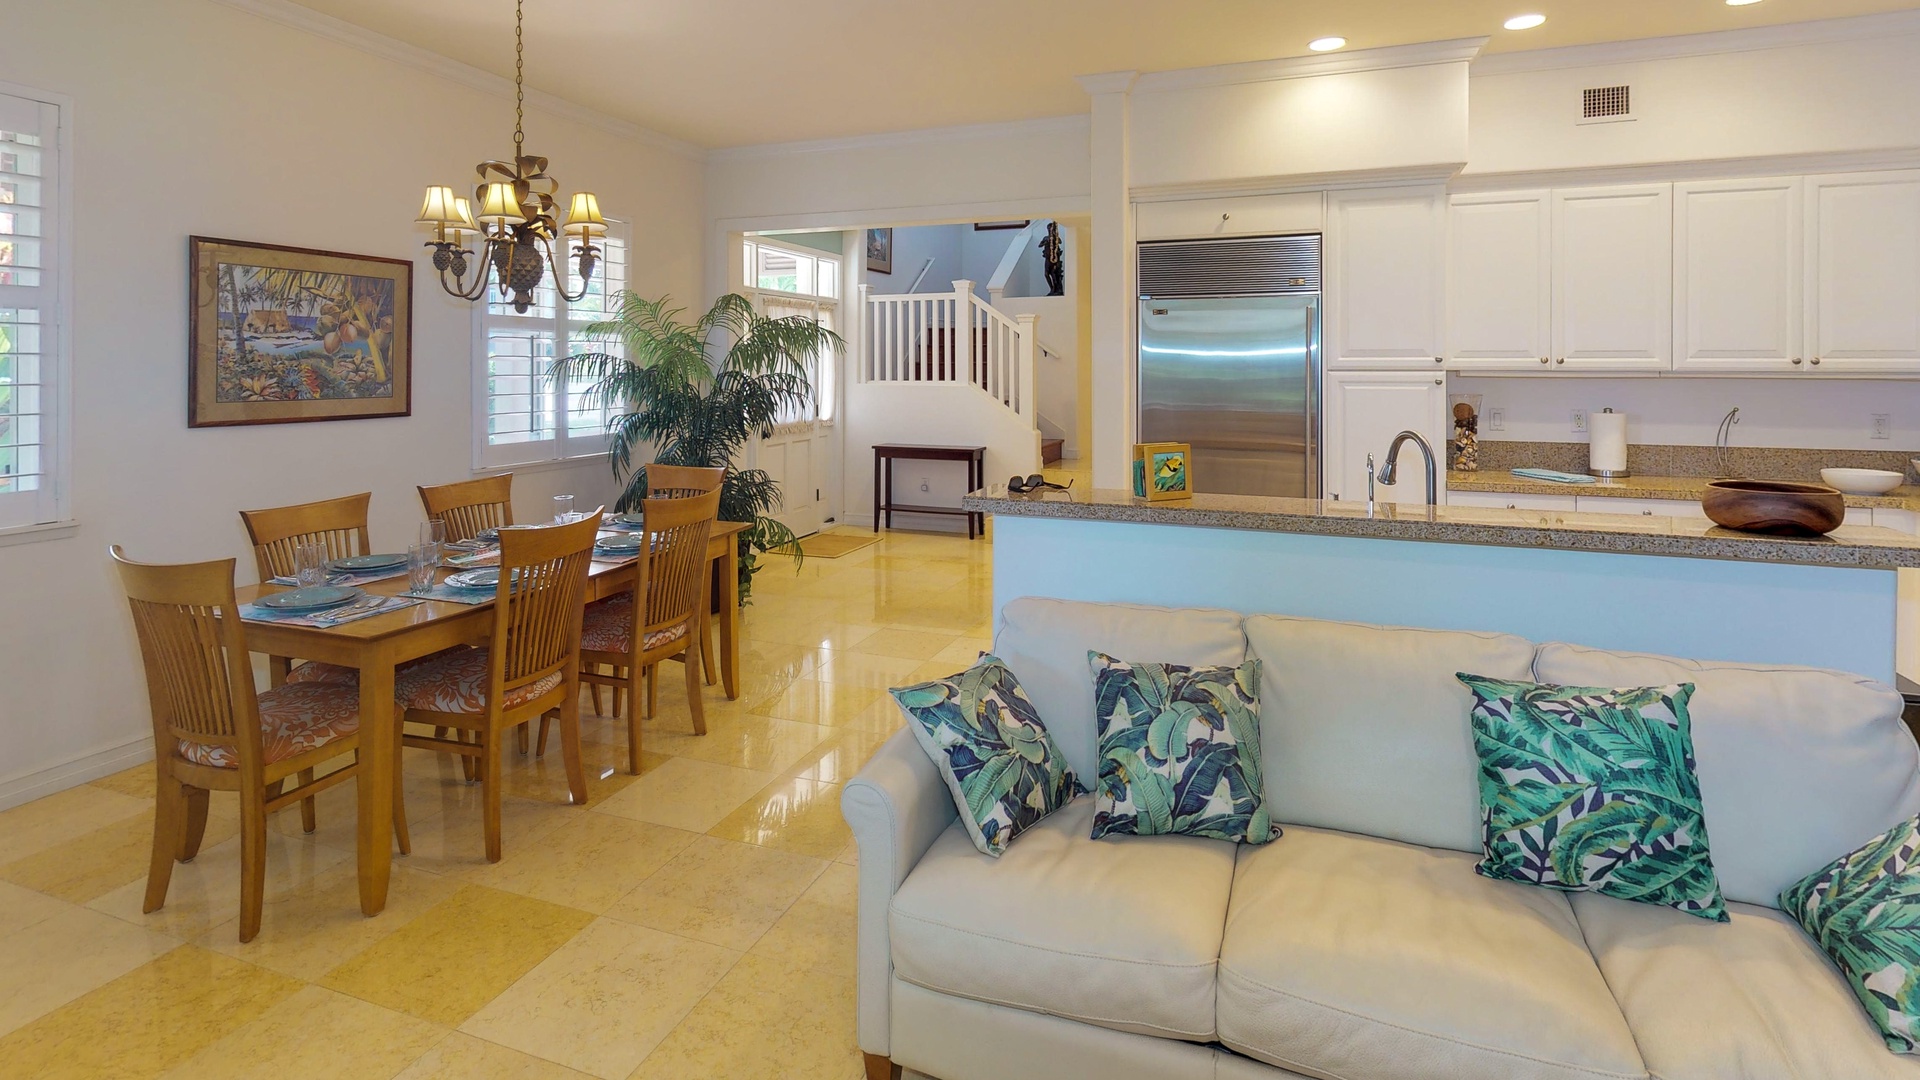 Kapolei Vacation Rentals, Coconut Plantation 1200-4 - The open floor plan connects all living spaces.